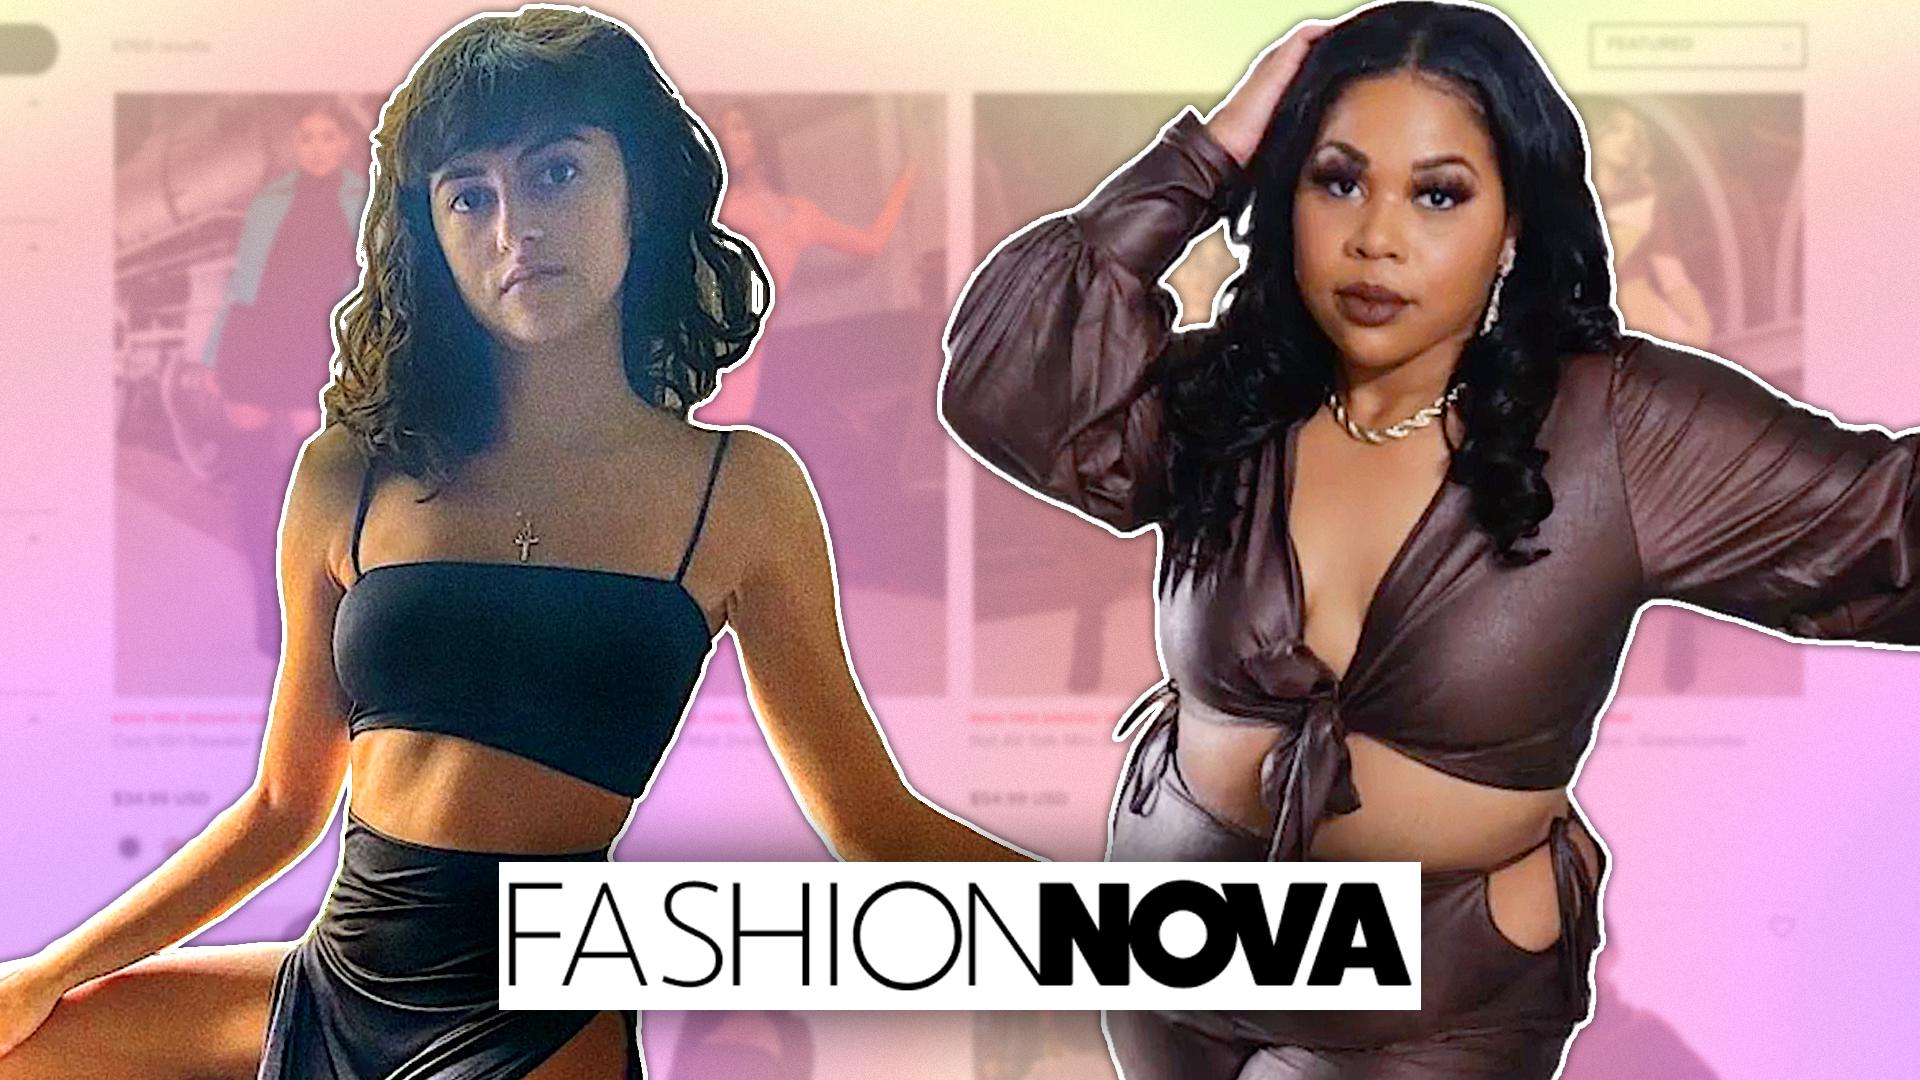 We Try the Most Revealing Clothes from Fashion Nova